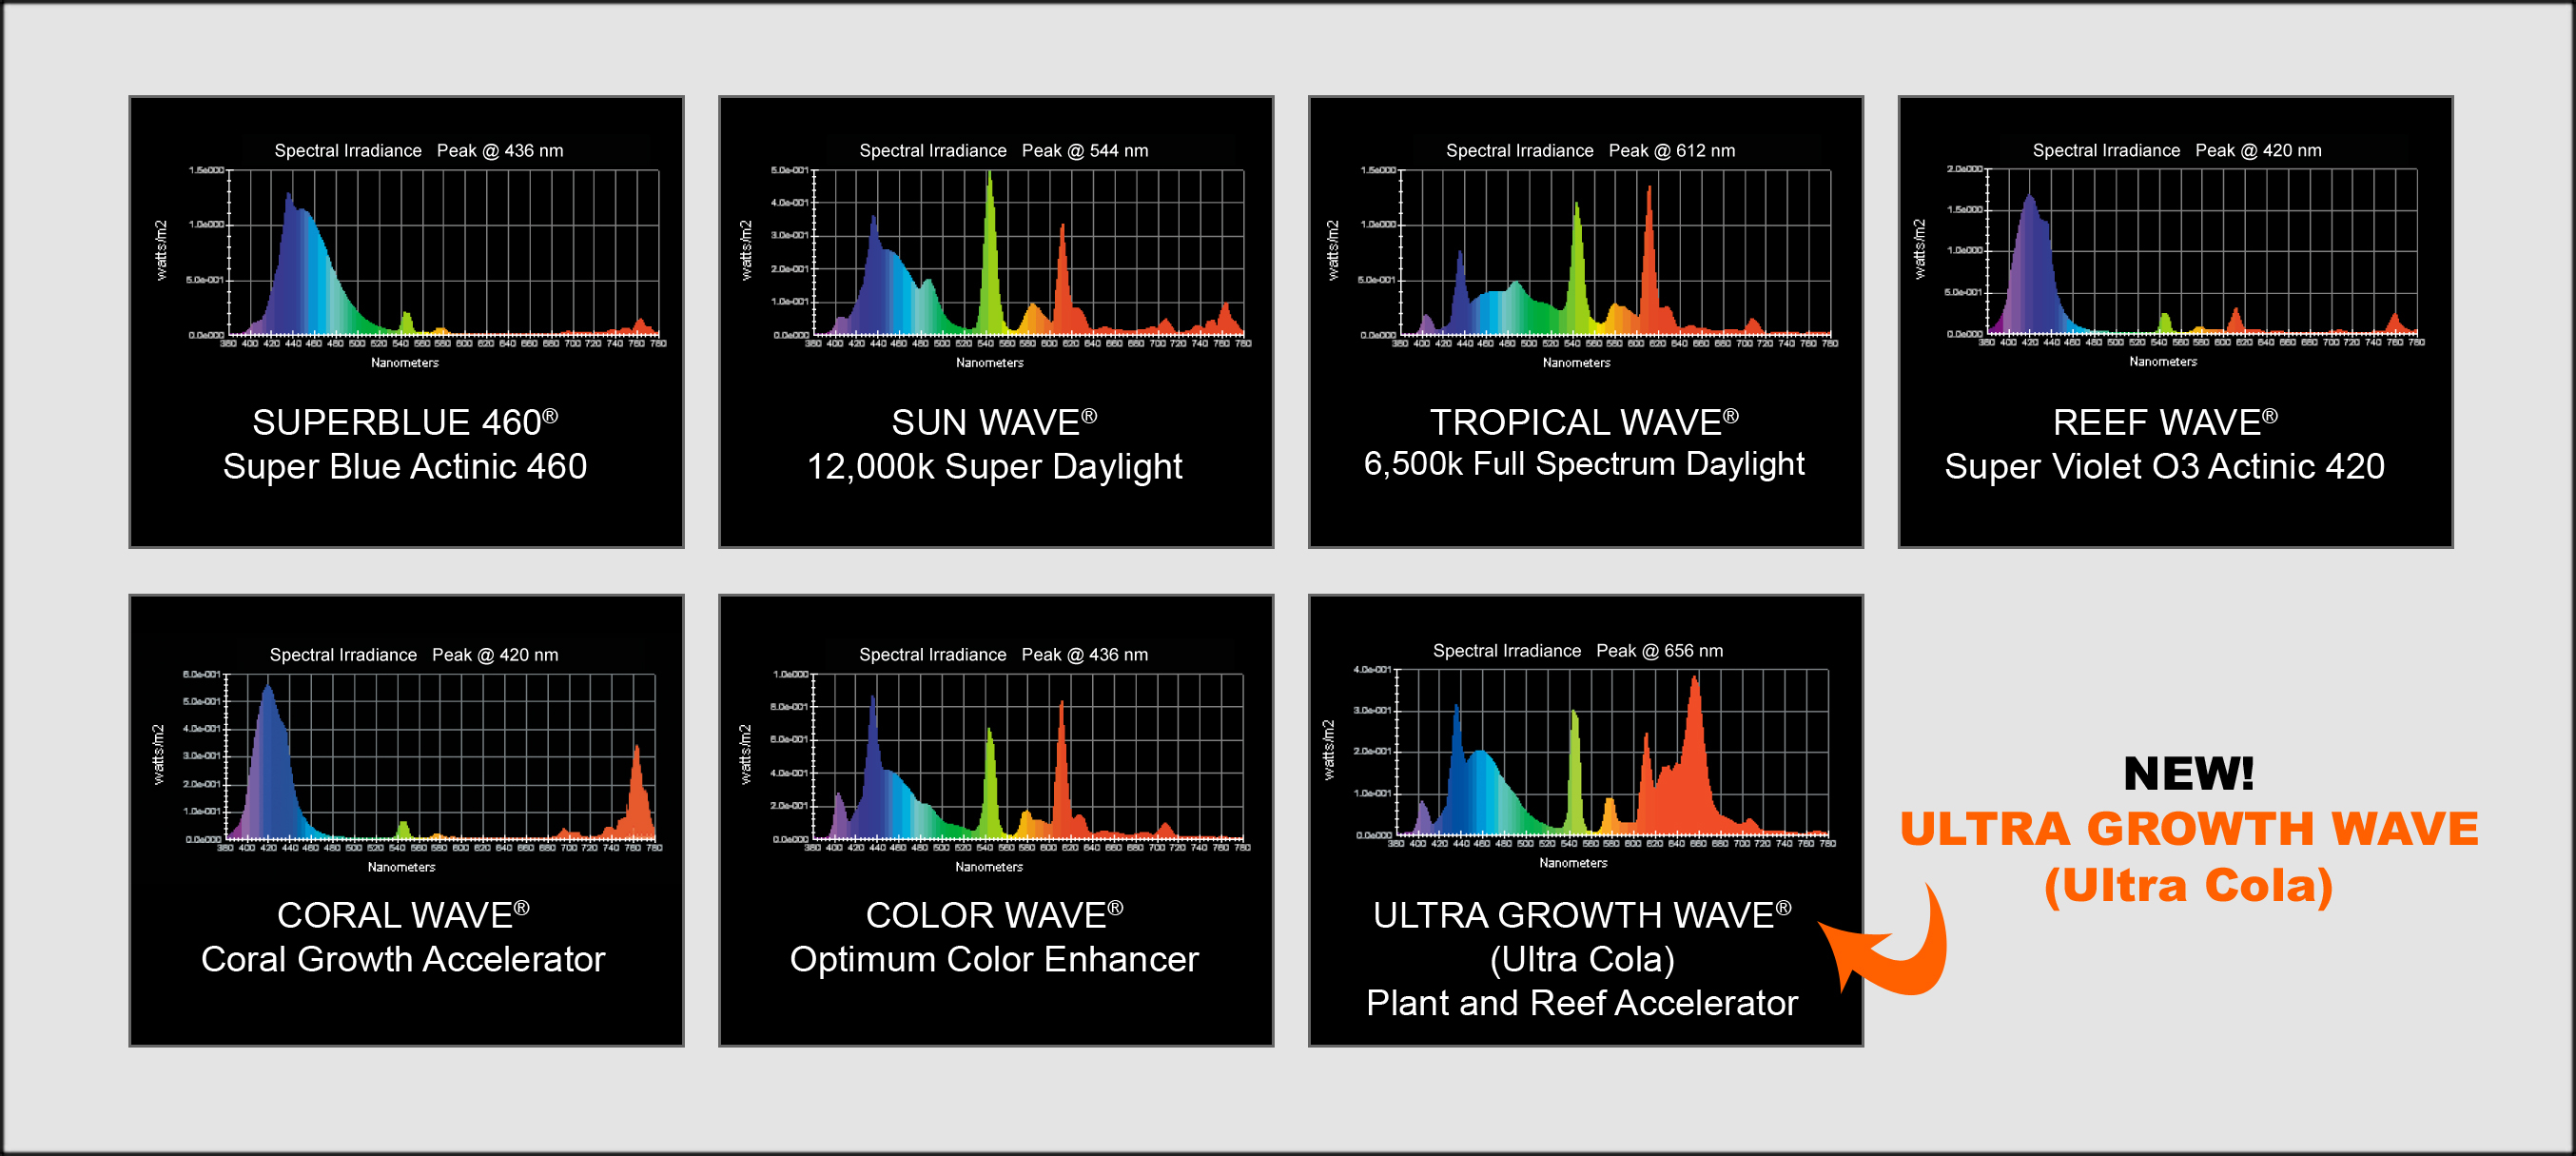 Wave Point T5ho Bulbs Any Good Spectral Graphs Included The throughout size 2708 X 1215